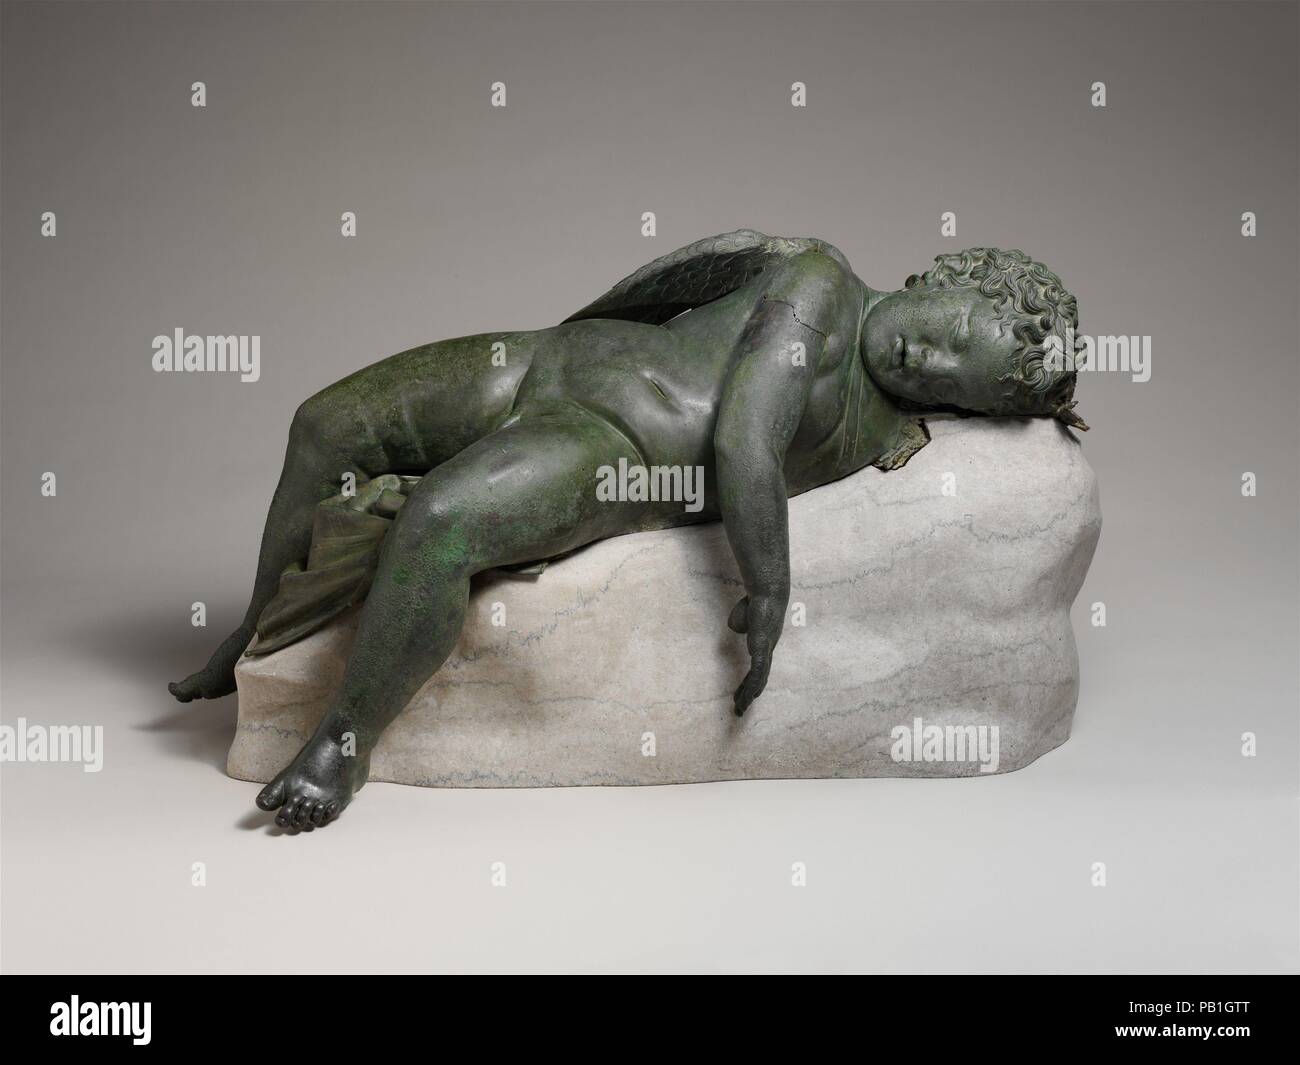 Bronze statue of Eros sleeping. Culture: Greek. Dimensions: 16 1/2 × 14 × 33 9/16 in., 275 lb. (41.9 × 35.6 × 85.2 cm, 124.7 kg)  Height (w/ base): 18 in. (45.7 cm). Date: 3rd-2nd century B.C..  The Hellenistic period introduced the accurate characterization of age. Young children enjoyed great favor, whether in mythological form, as baby Herakles or Eros, or in genre scenes, playing with each other or with pets. This Eros, god of love, has been brought down to earth and disarmed, a conception considerably different from that of the powerful, often cruel, and capricious being so often addresse Stock Photo